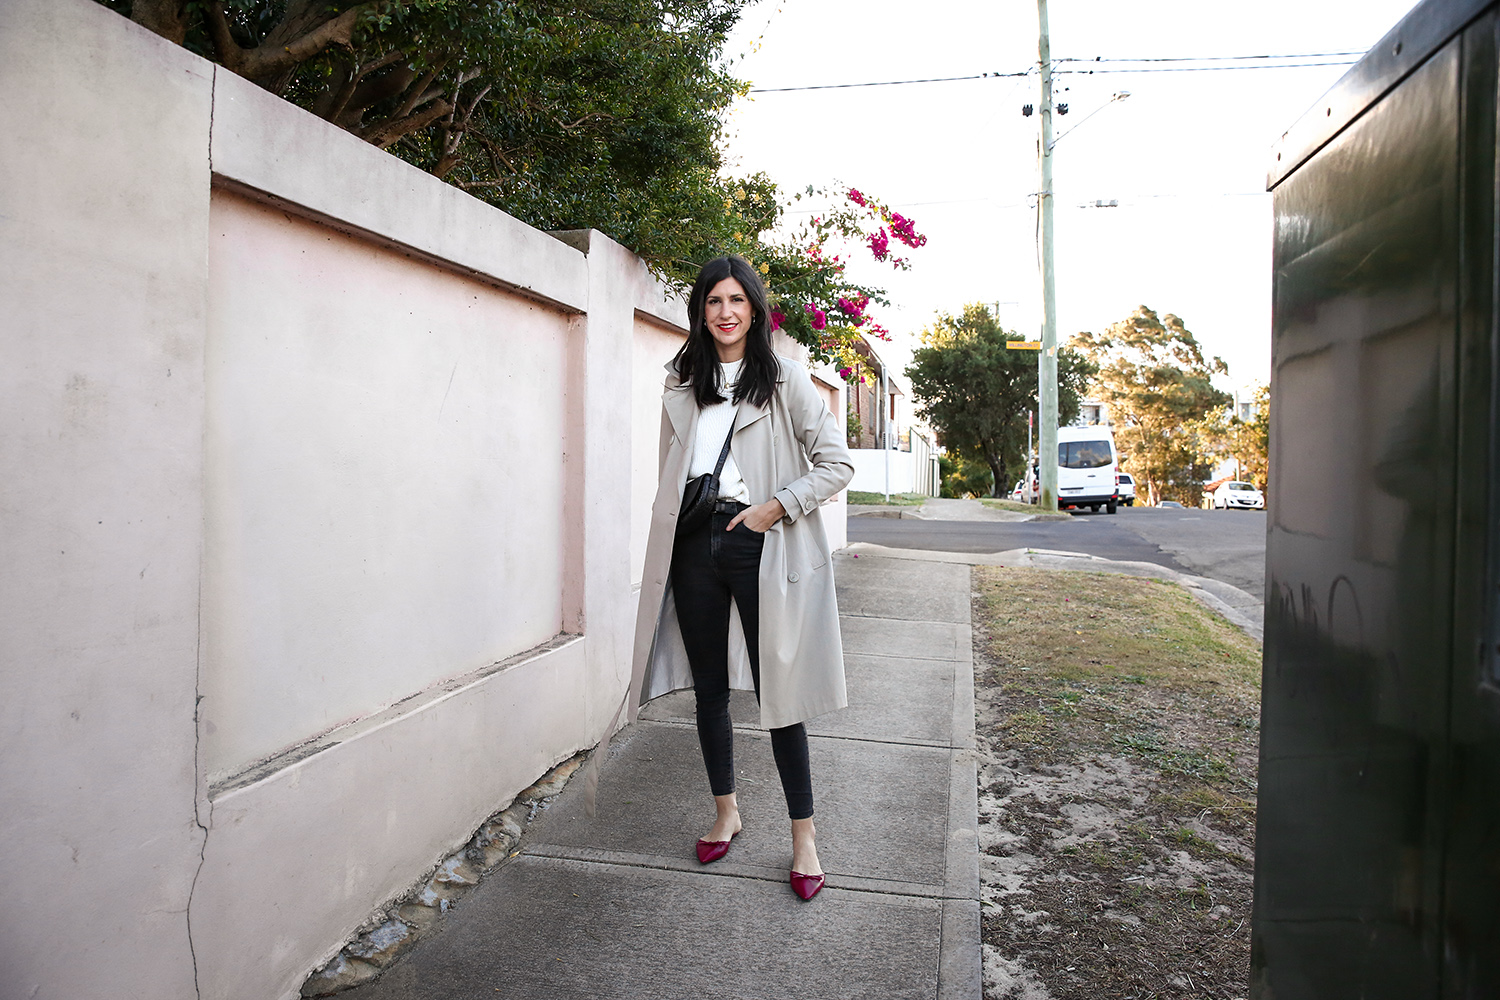 Jamie Lee of Mademoiselle wearing a minimal outfit with red shoes